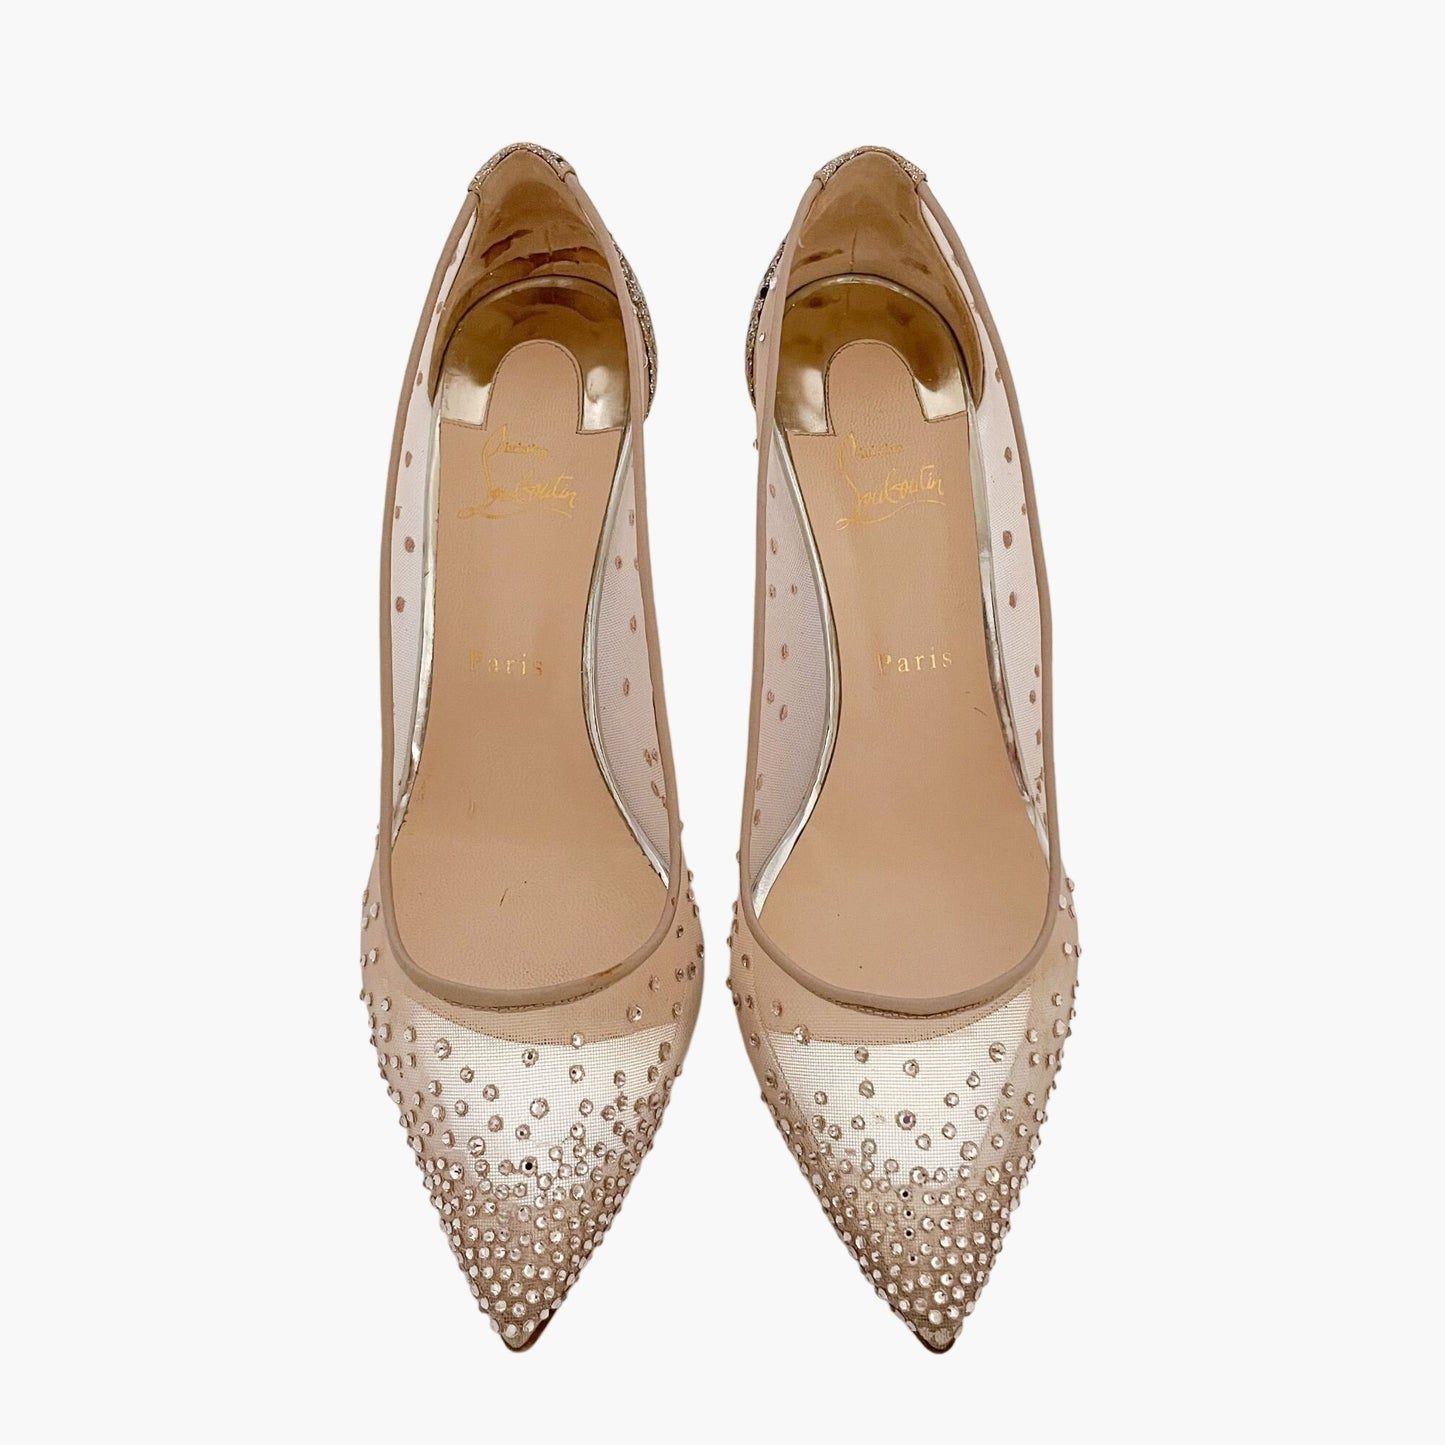 Christian Louboutin Follies Strass 85 Pumps in Nude Mesh Size 41